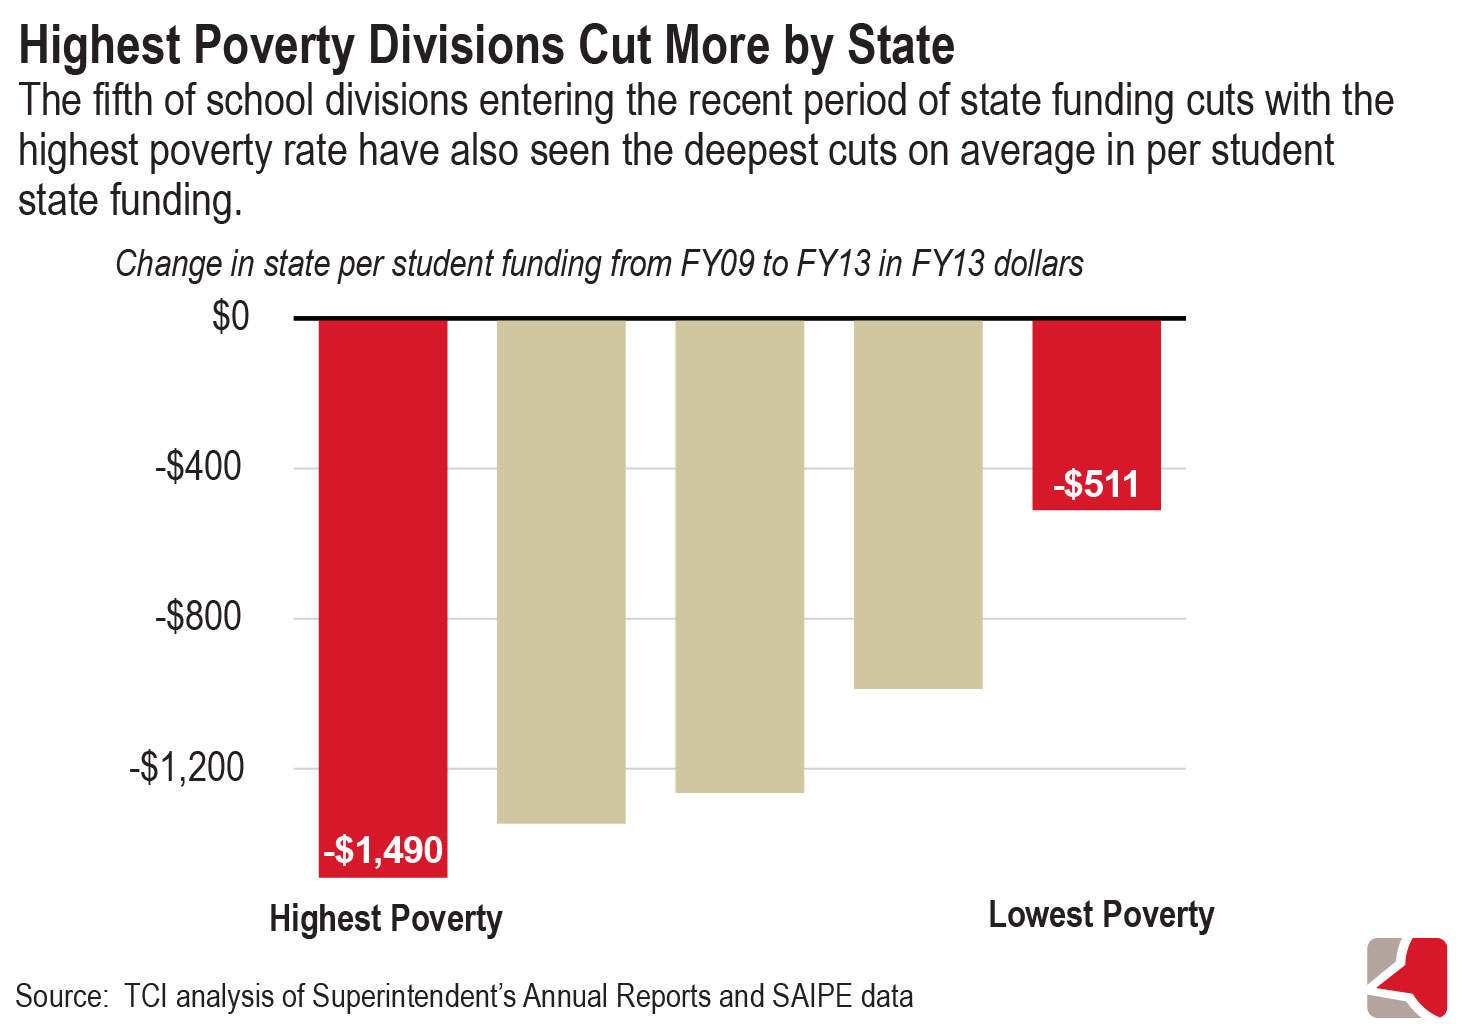 Bar graph showing the impact of state funding cuts on the highest poverty divisions between fiscal years 2009 to 2013. The fifth of school divisions entering the recent period of state funding cuts with the highest poverty rate have also seen the deepest cuts on average in per student state funding.  Highest poverty divisions saw an average decrease of $1,490, while the lowest poverty divisions saw an average cut of $511